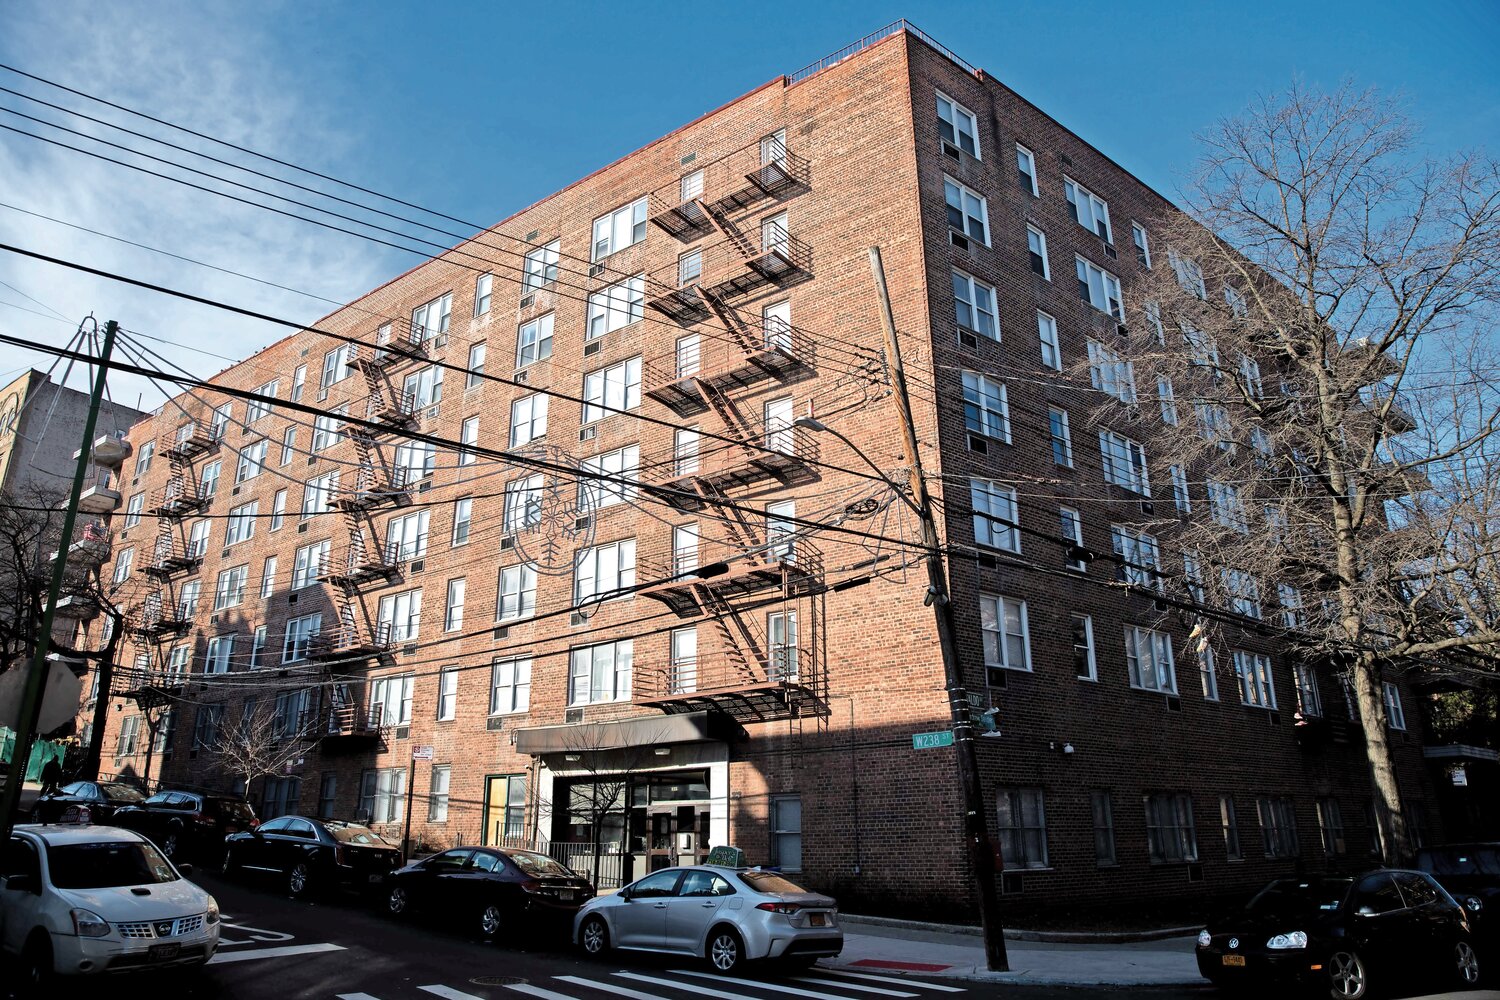 The Manhattan College apartments known as the Overlook Manor has been sold to Stagg Group for $18 million. The developer plans to build affordable housing at the location.